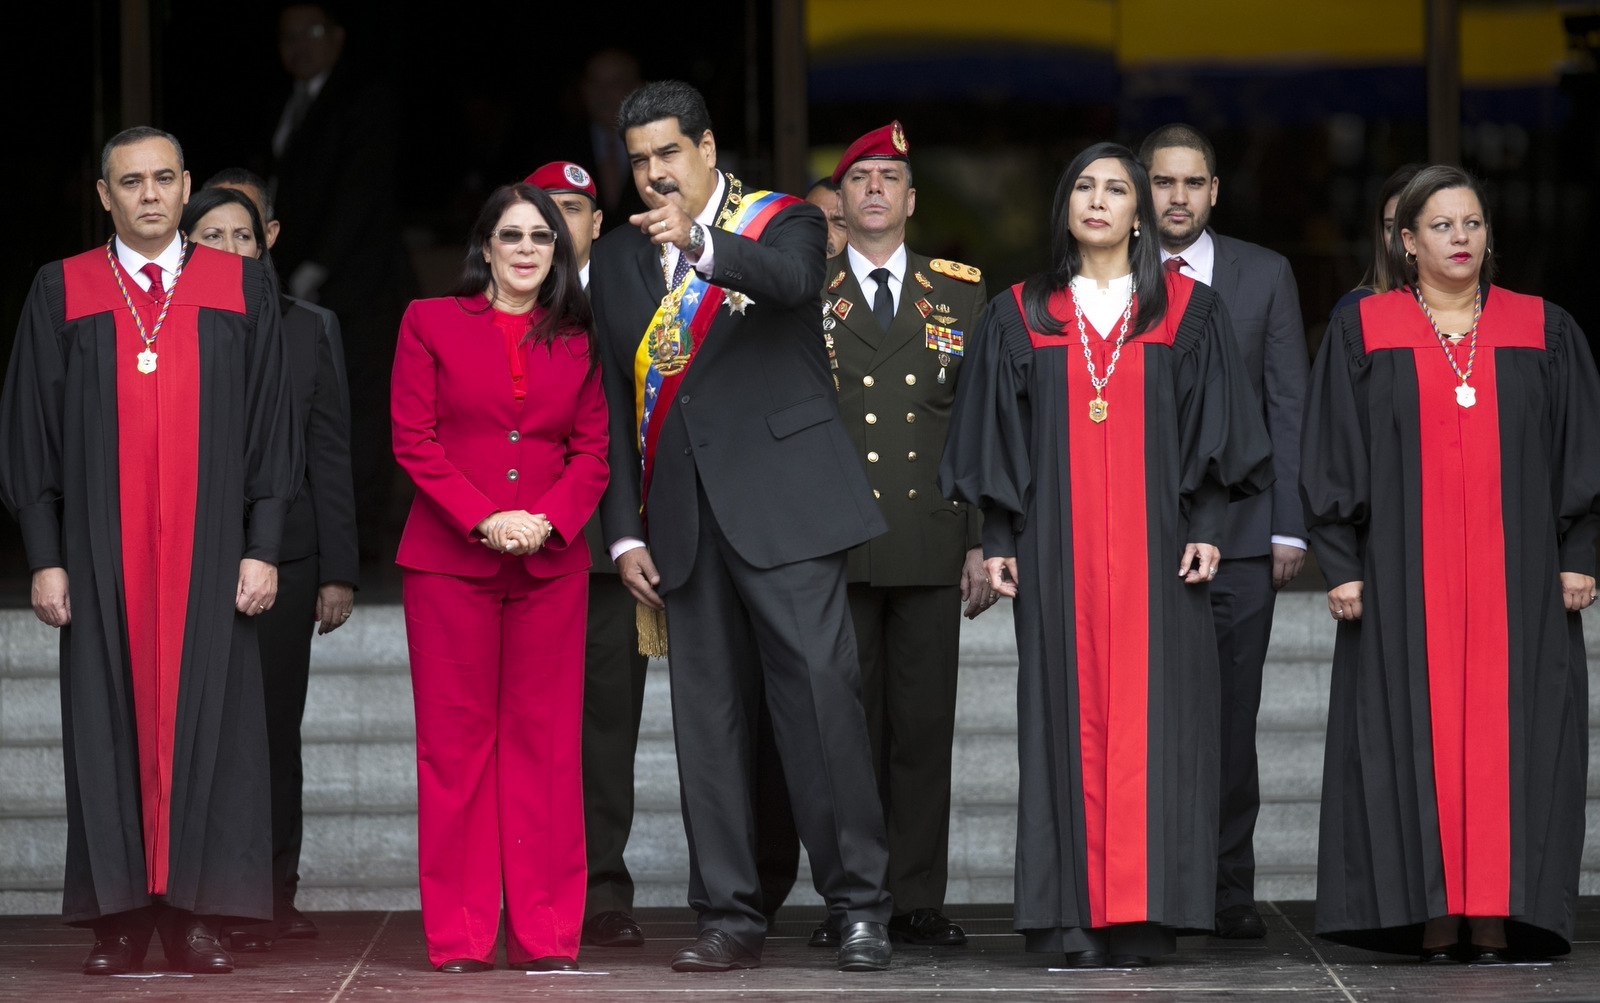 Venezuela's President Nicolas Maduro speaks with first lady Cilia Flores as they arrive to the Supreme Court, before delivering his state of the union address, in Caracas, Venezuela. (AP/Ariana Cubillos)